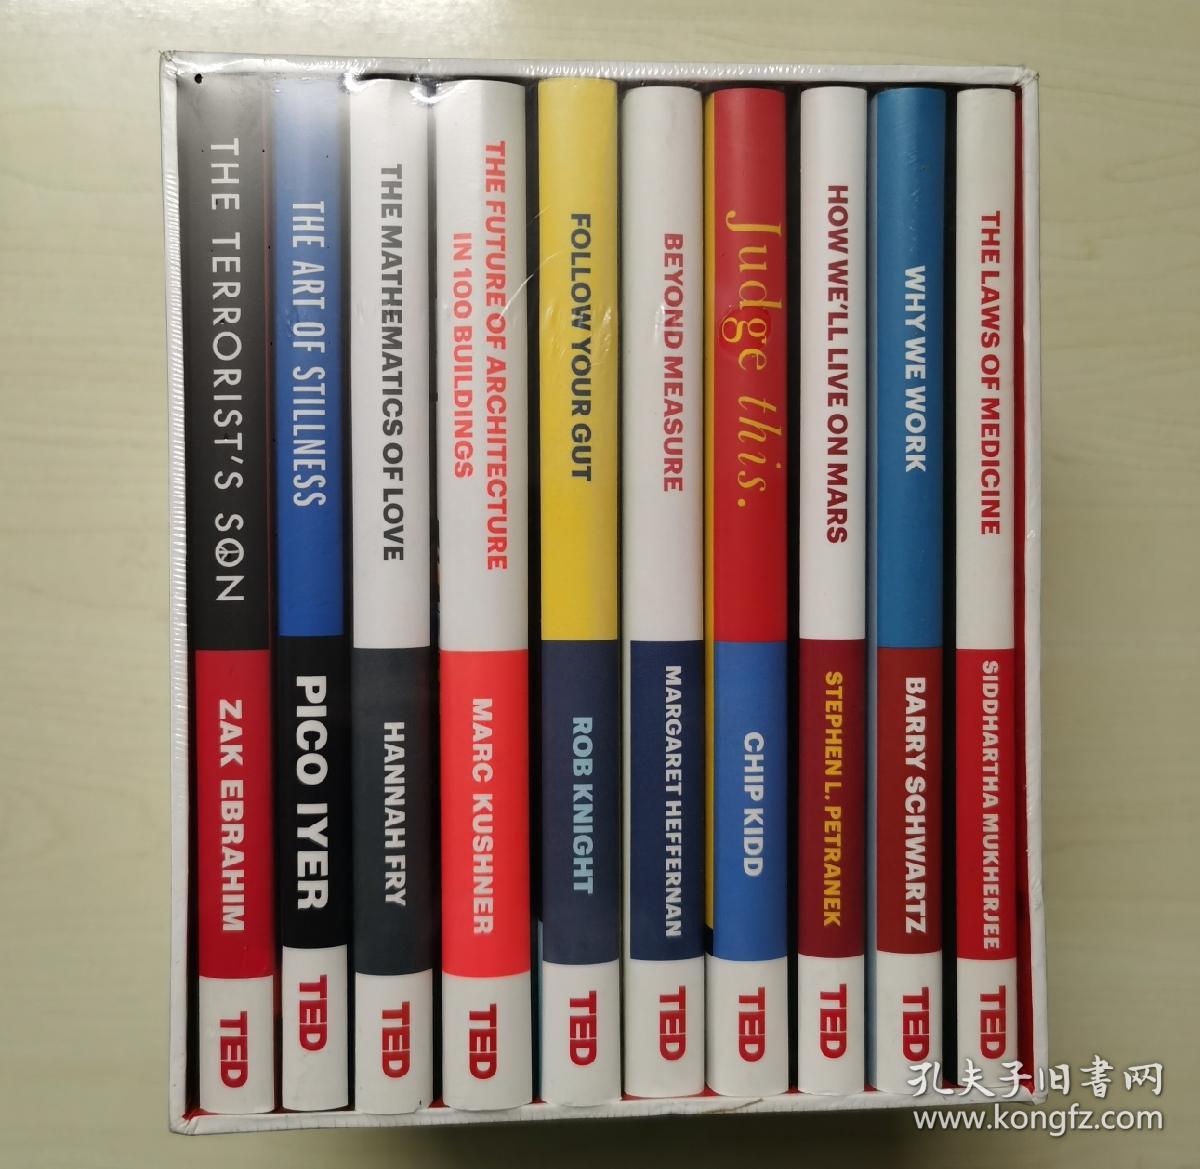 TED Books Box Set: The Completist  The Terrorist TED演讲合集，全新未拆塑封